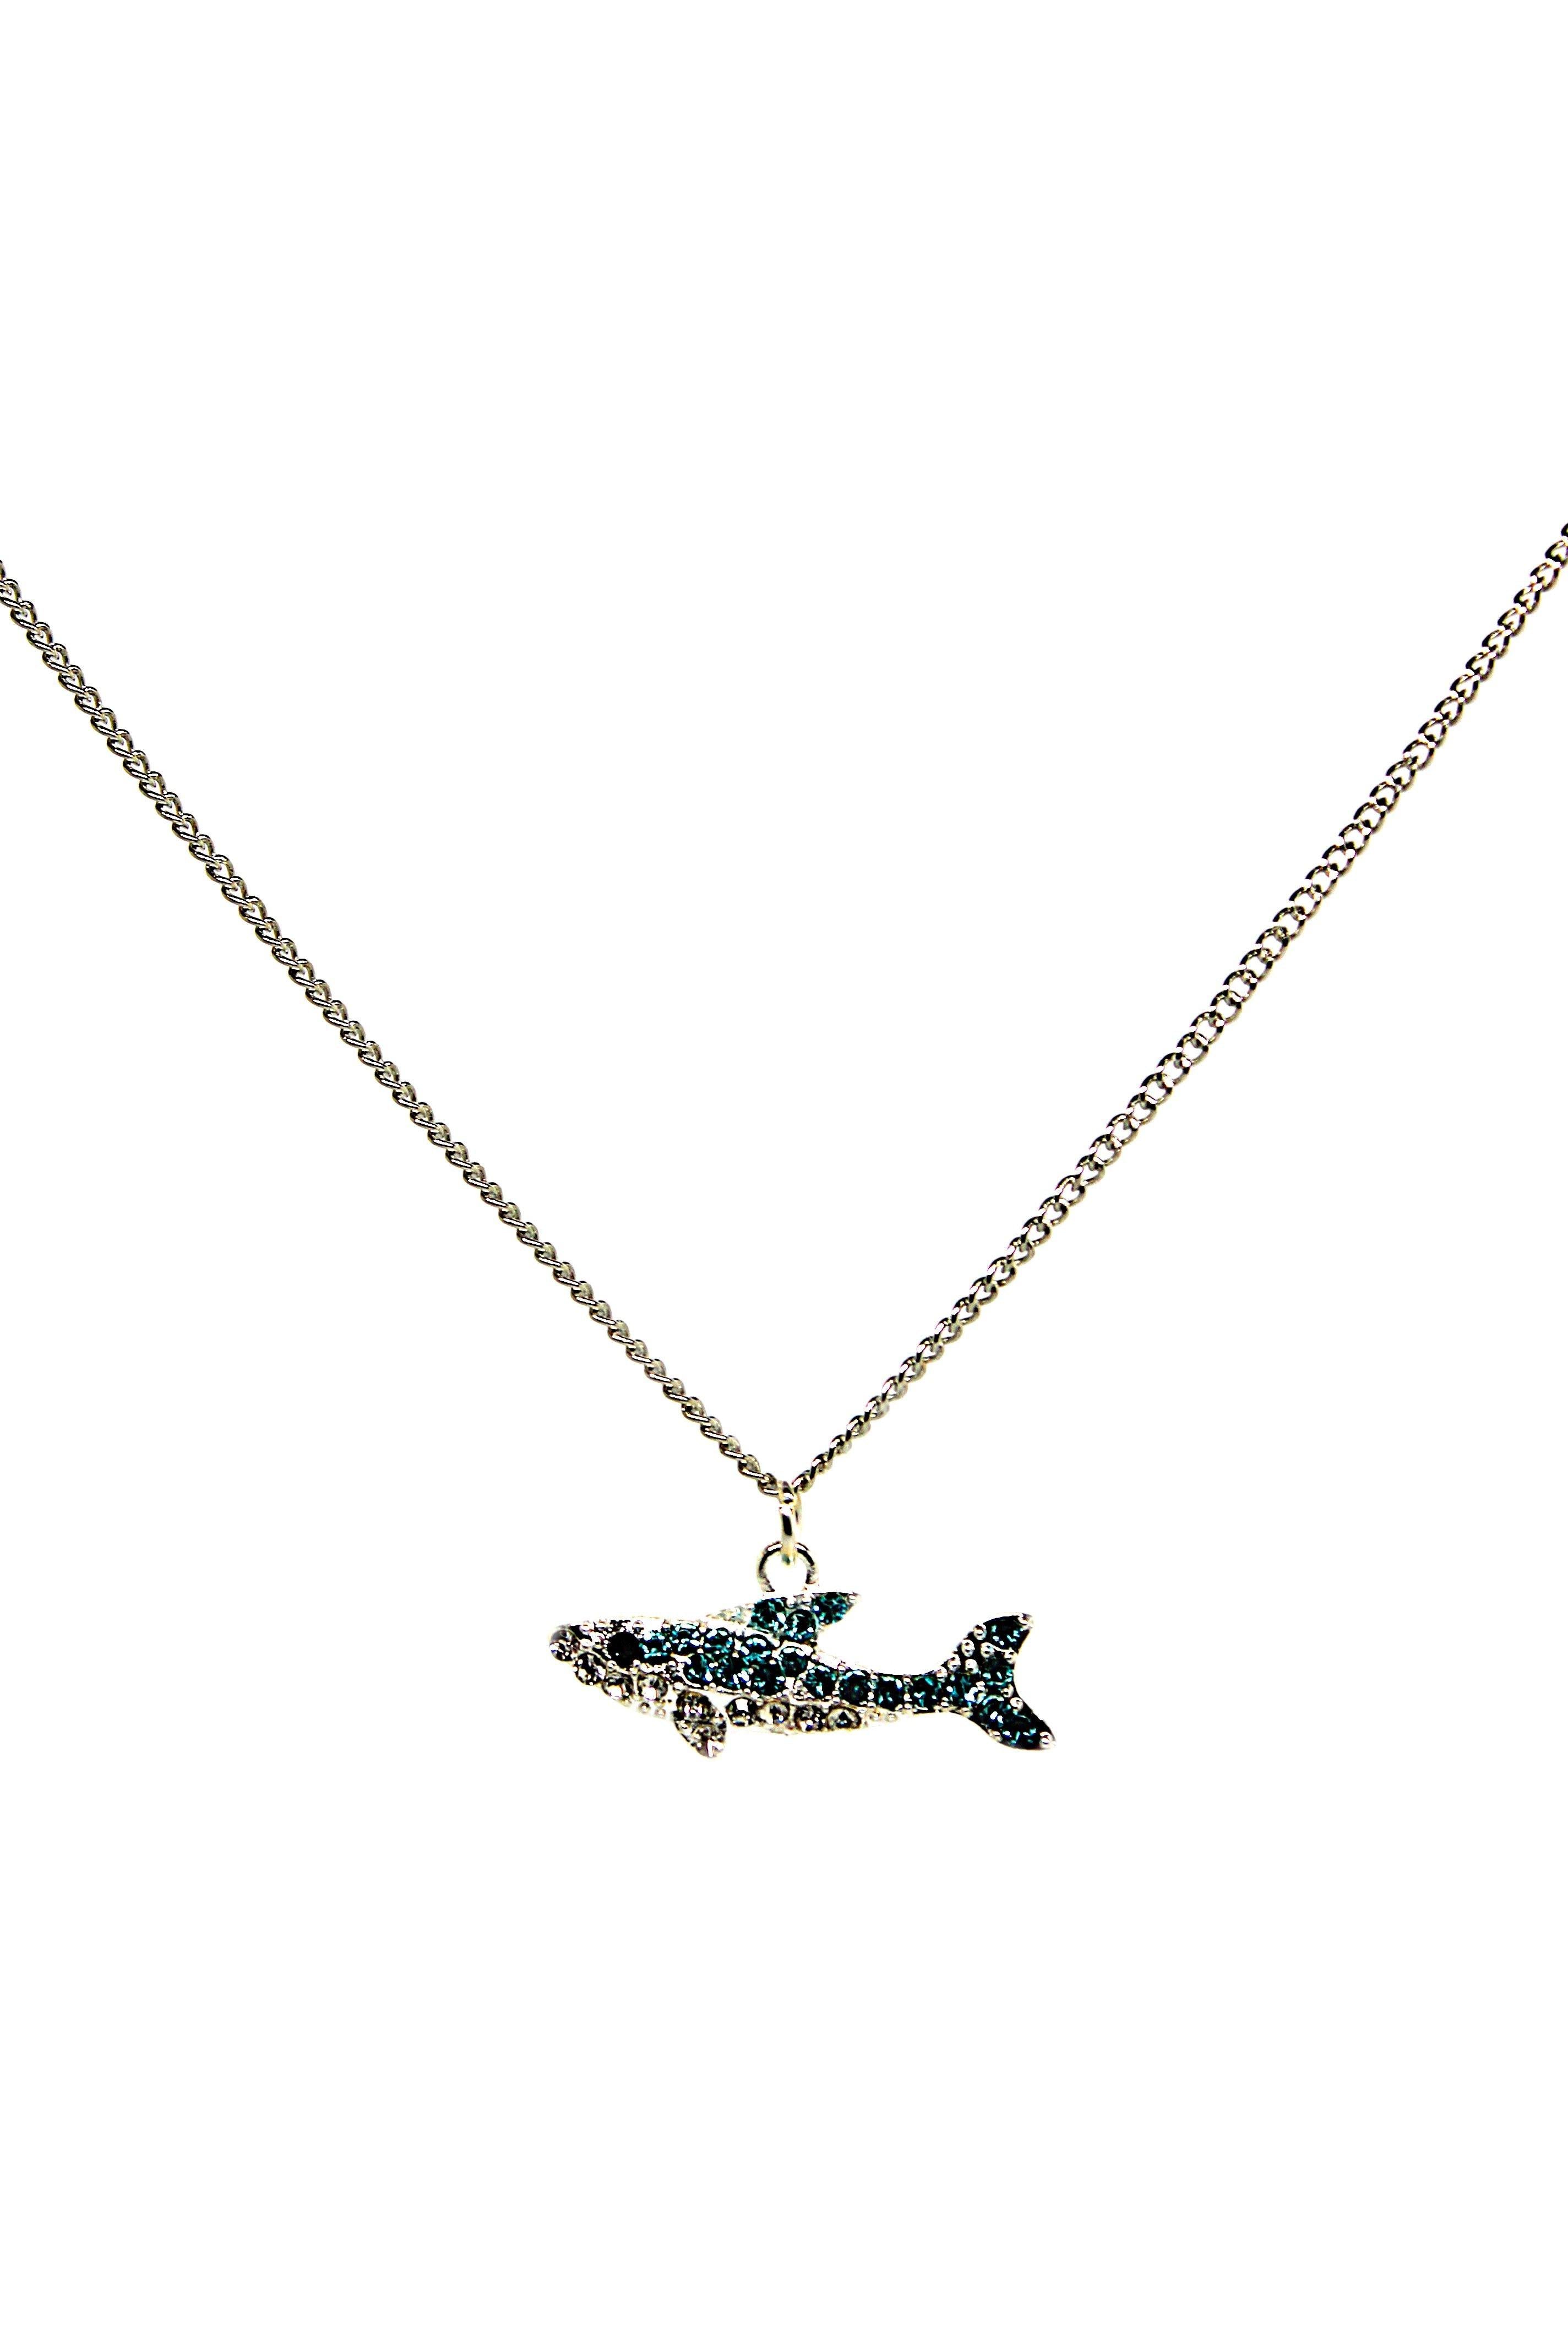 Shark Blue Necklace - Wildtouch - Wildtouch